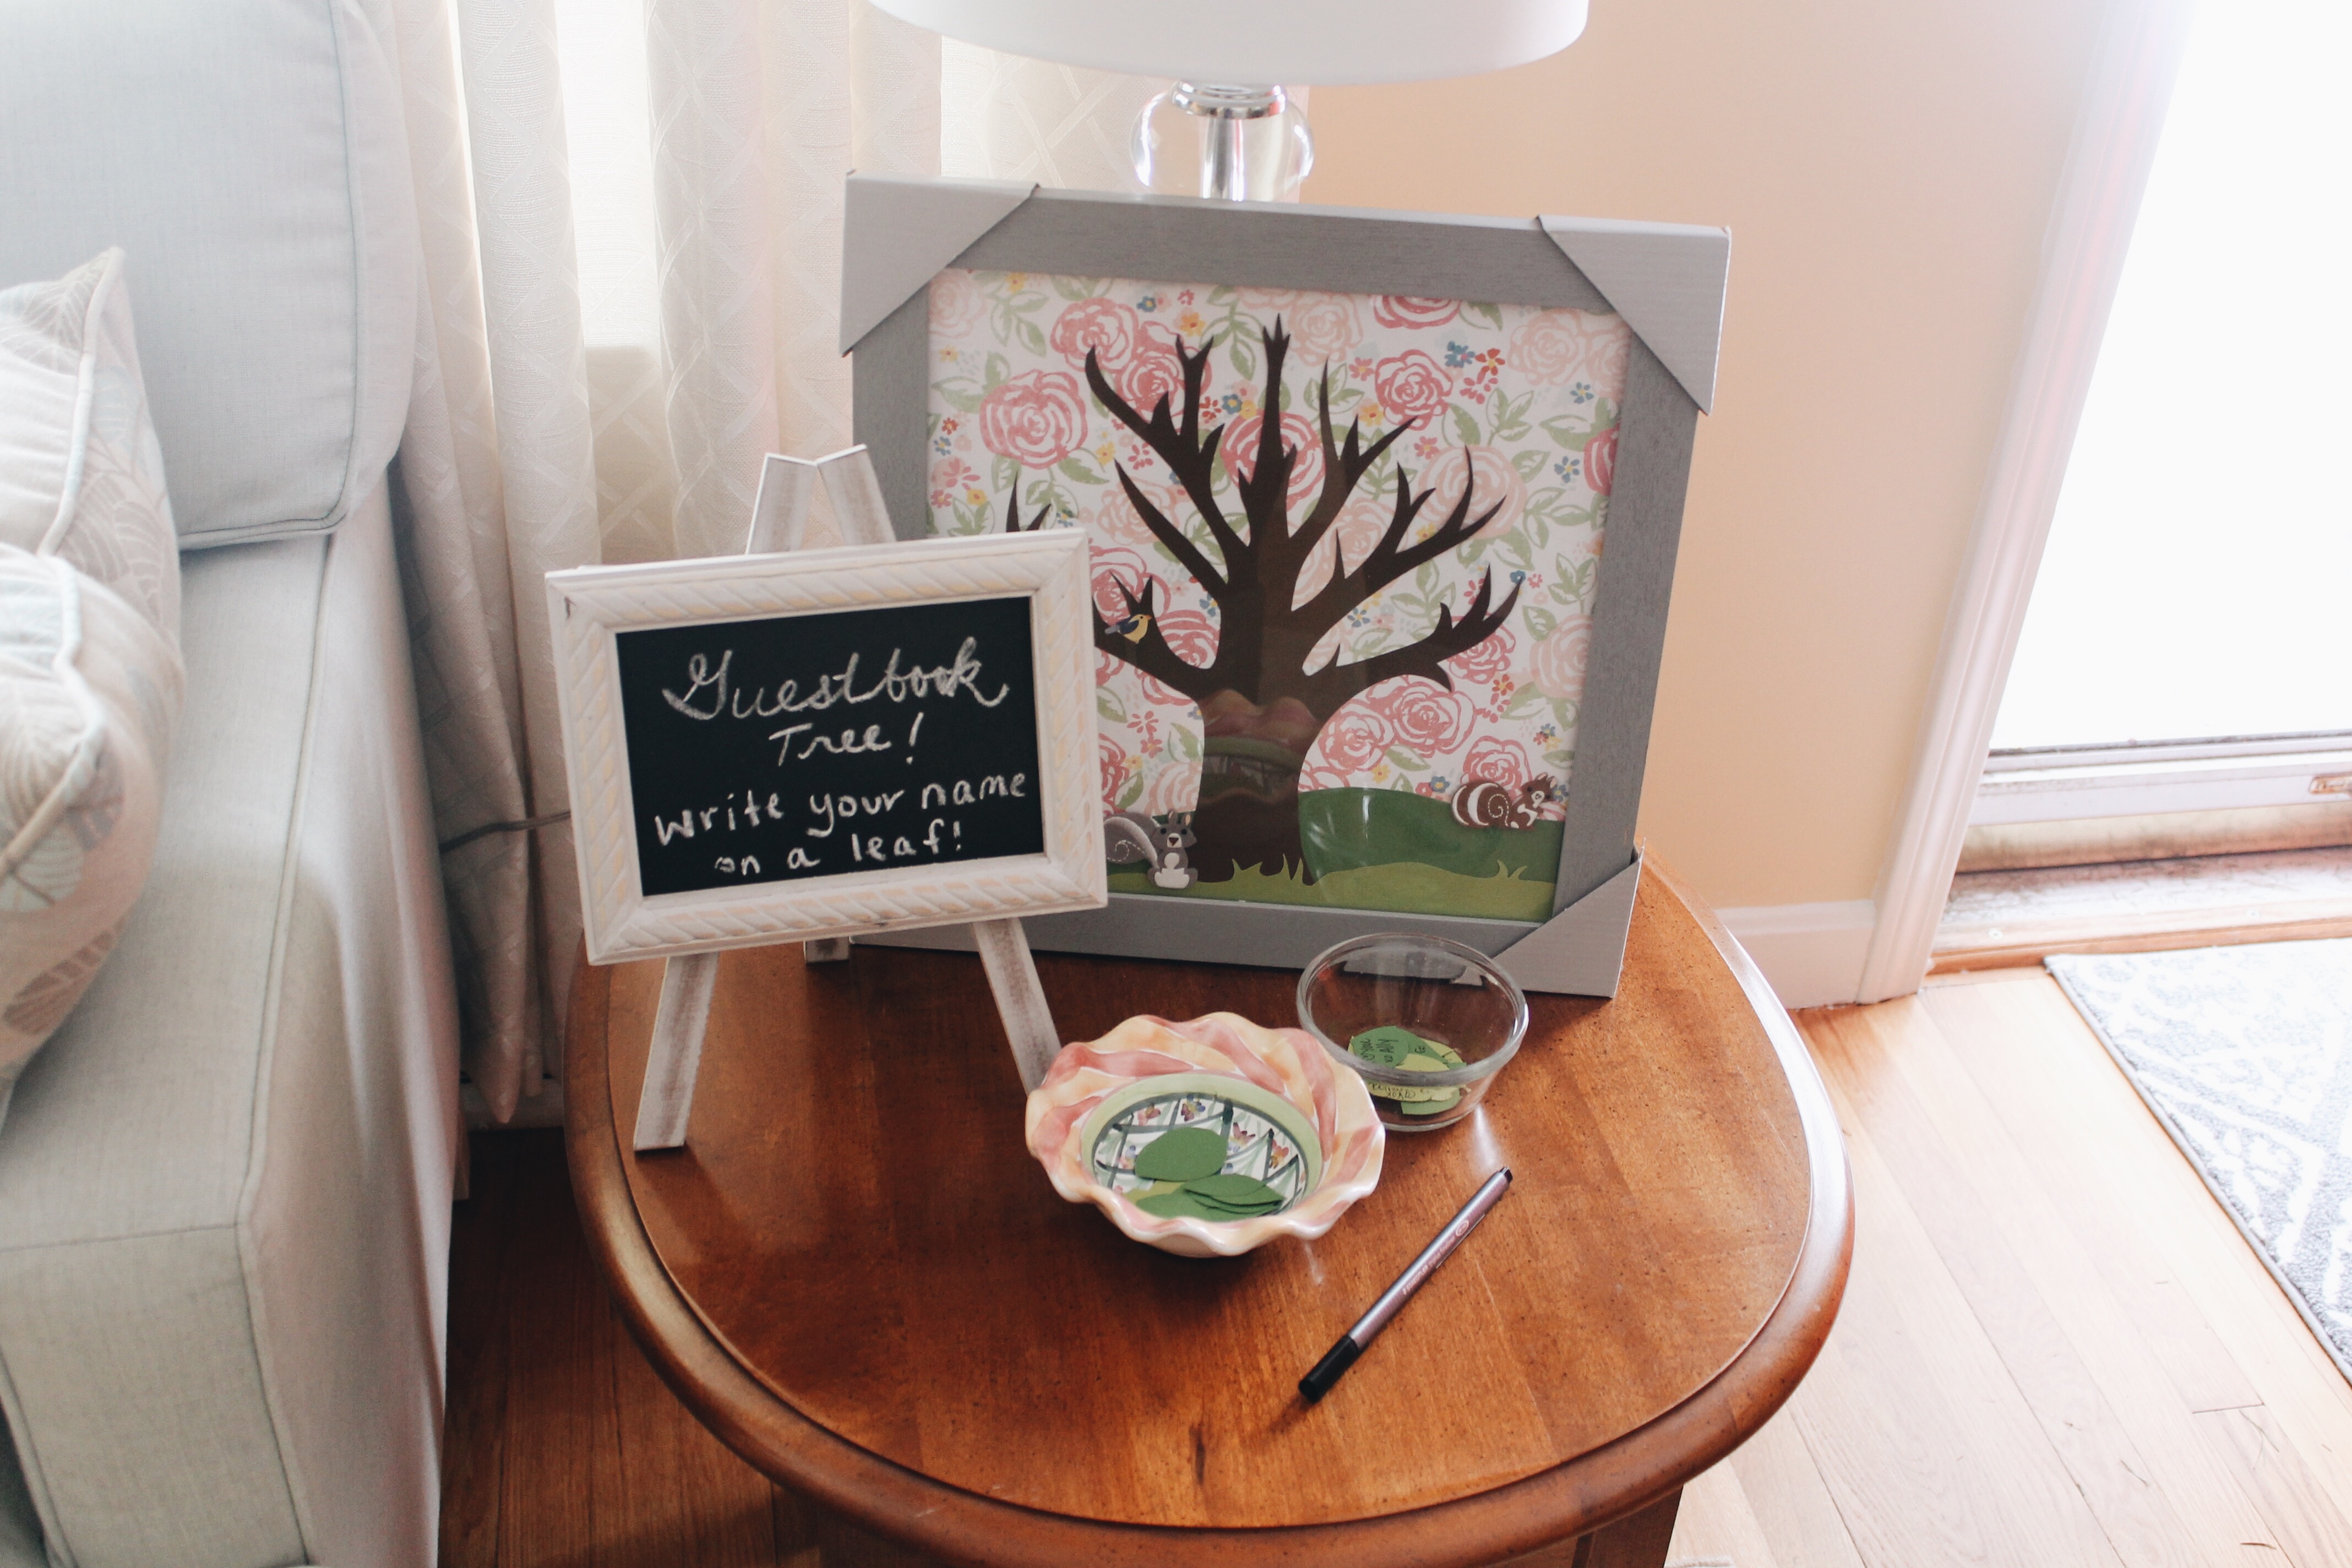 Cute baby shower wishing tree! Guests make a wish for baby and then hang it on the tree | Market Street Petite blog